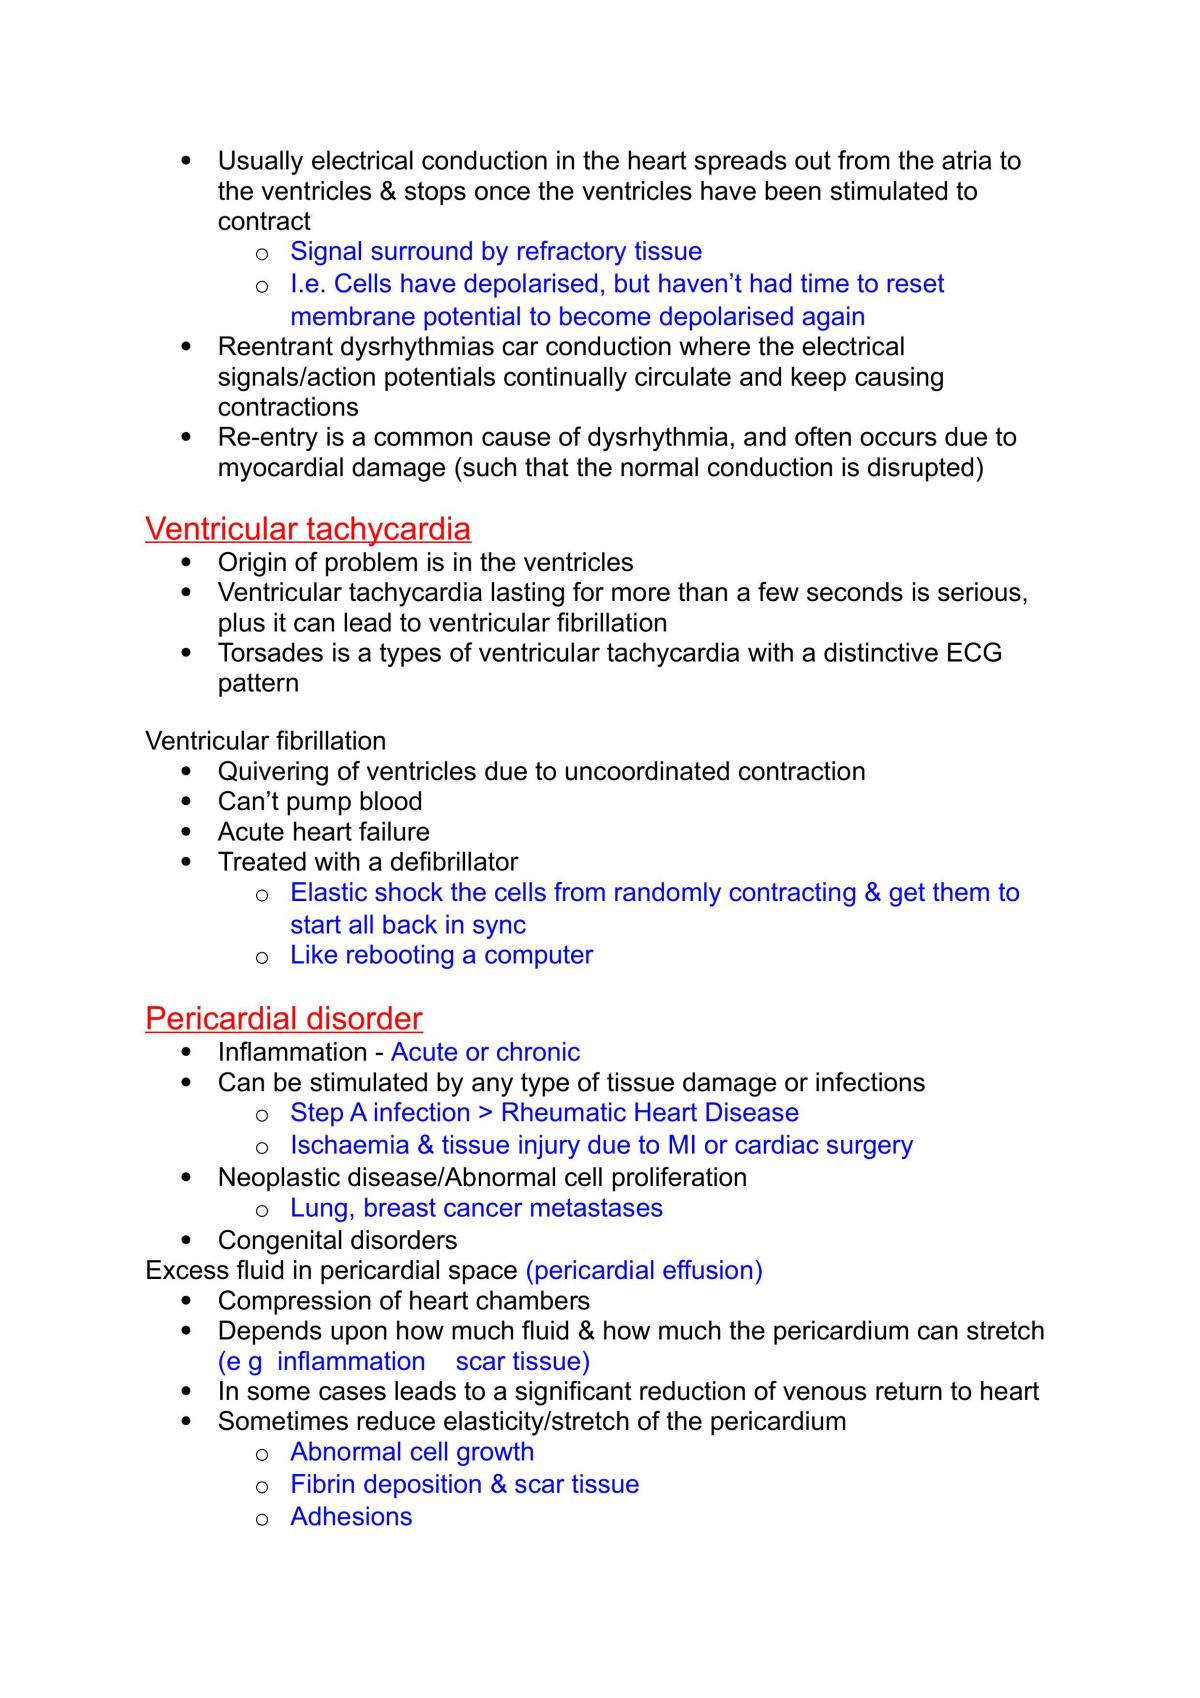 Pharmacology for Allied Health Professionals Exam Guide - Page 47